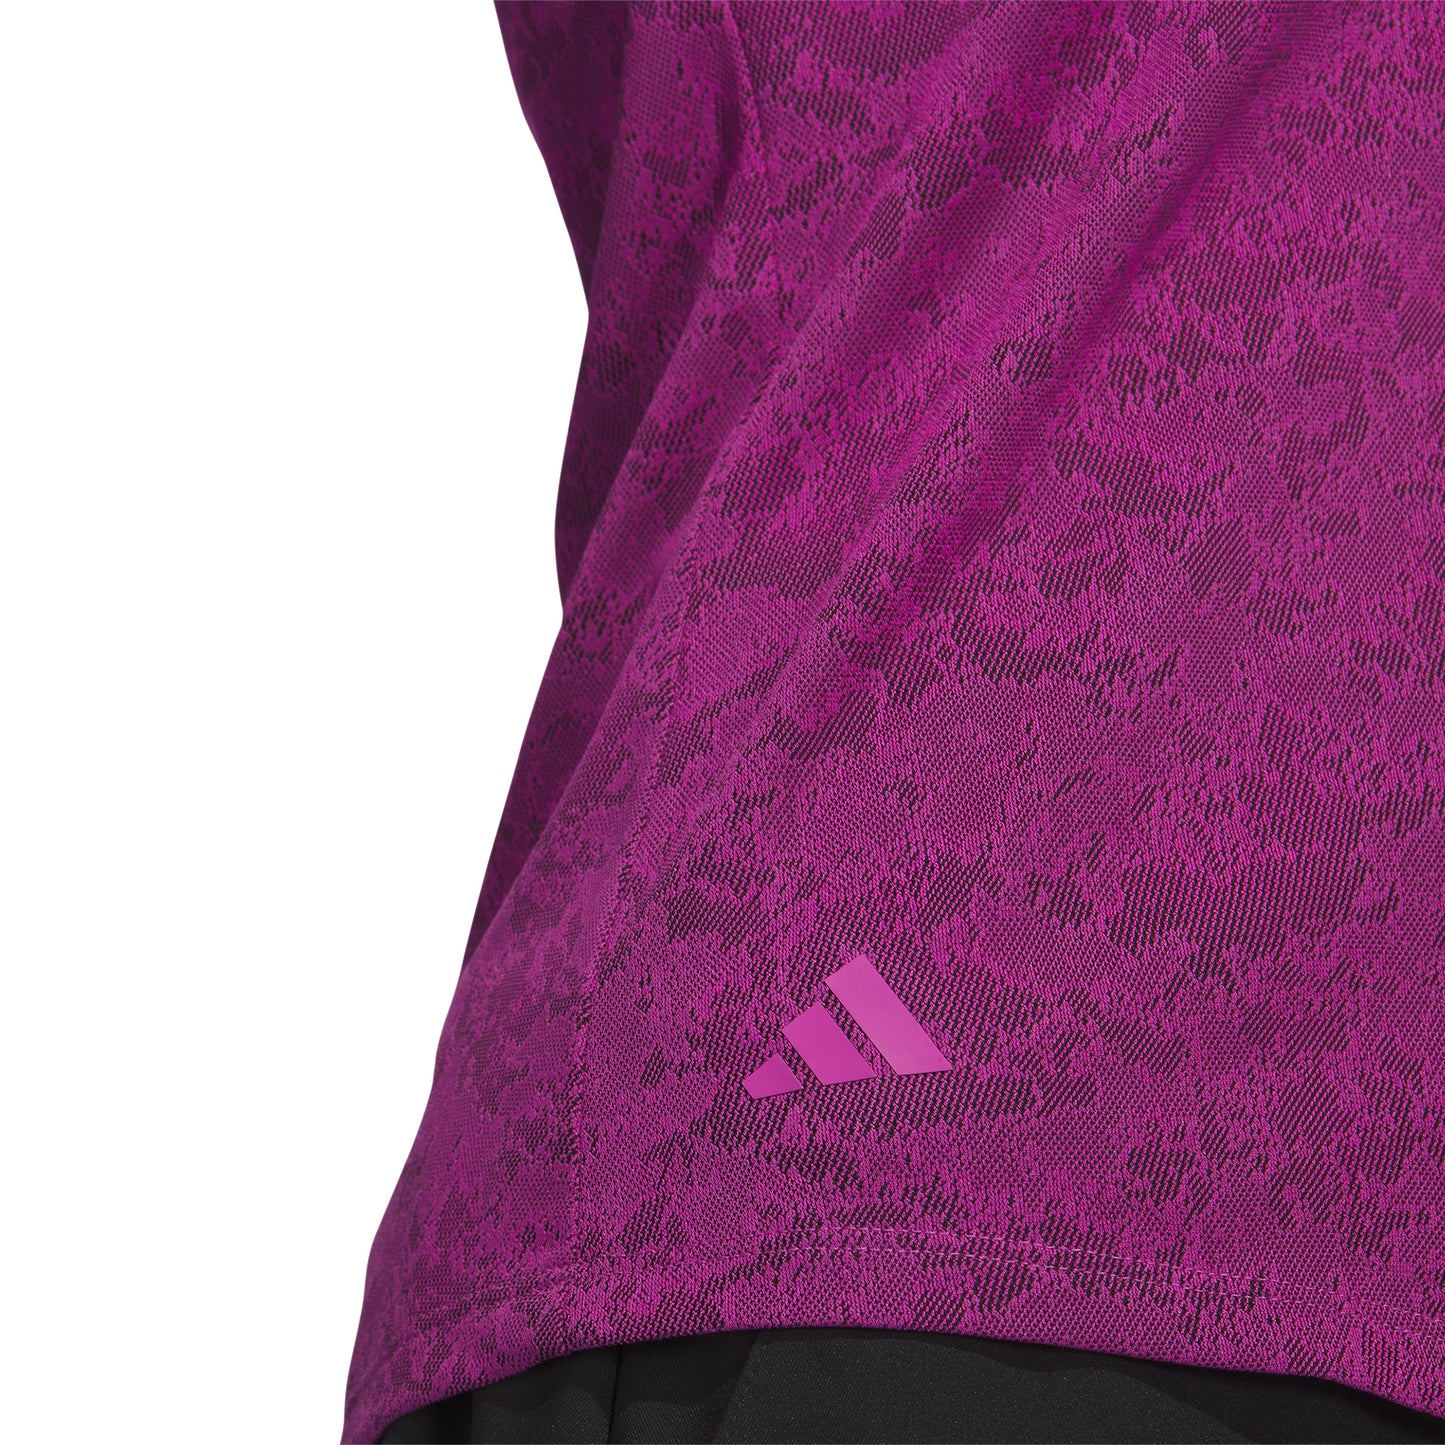 adidas Ladies Short Sleeve Golf Polo with Jacquard Lace Print